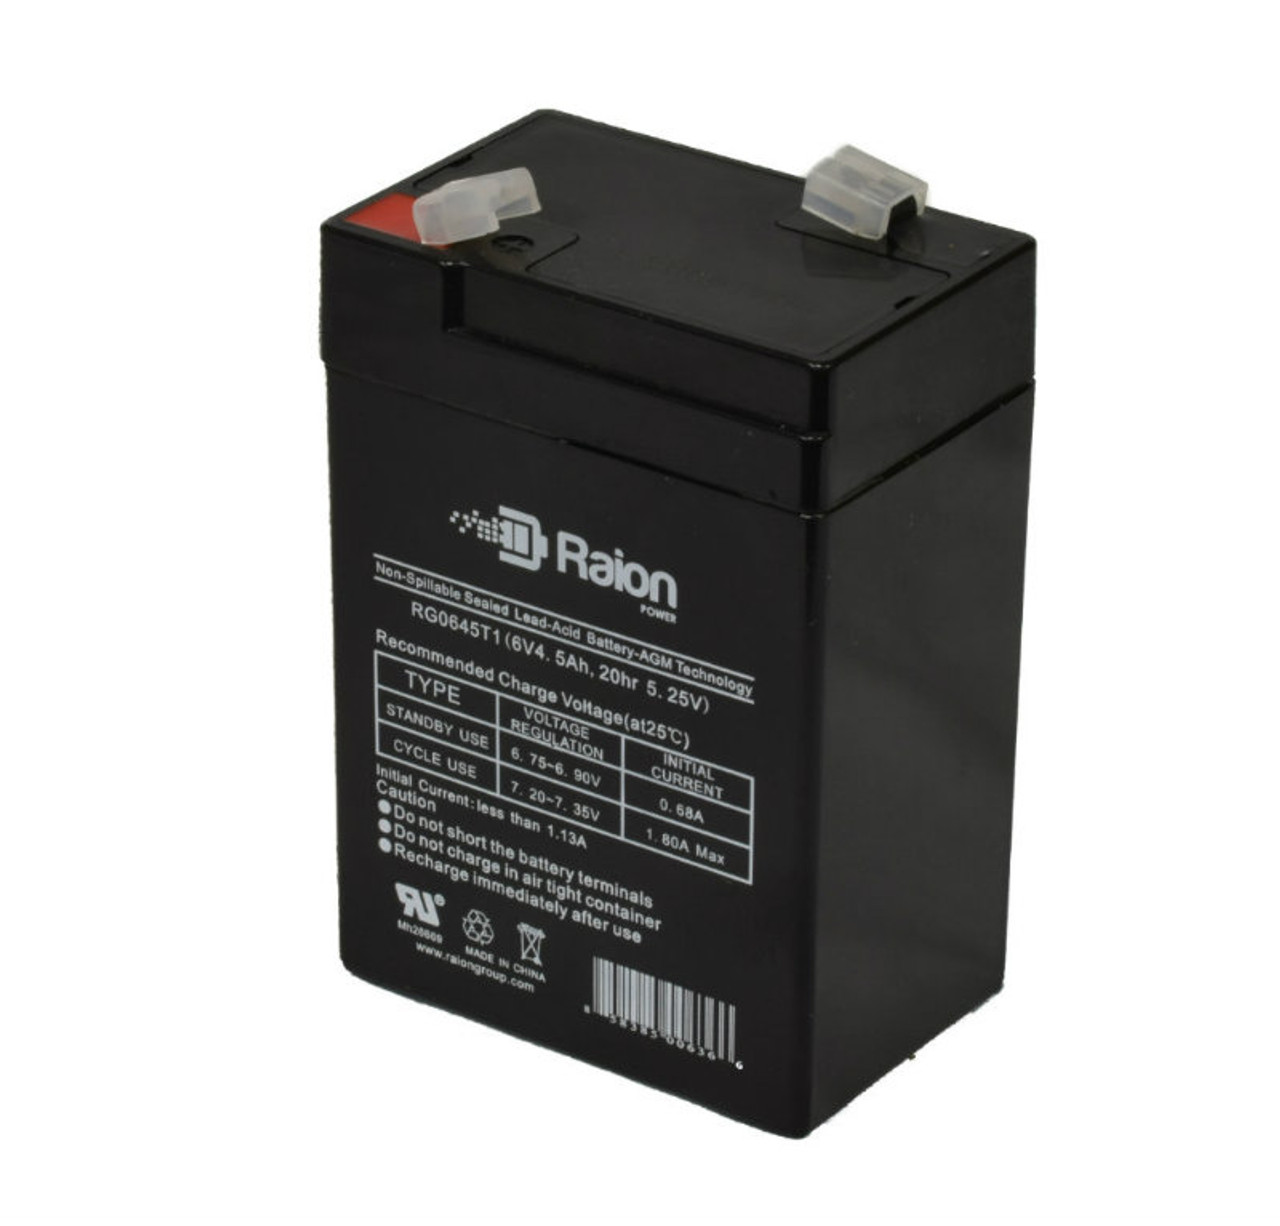 Raion Power RG0645T1 6V 4.5Ah Replacement Battery Cartridge for Philips Medical Systems HC102 Autodial